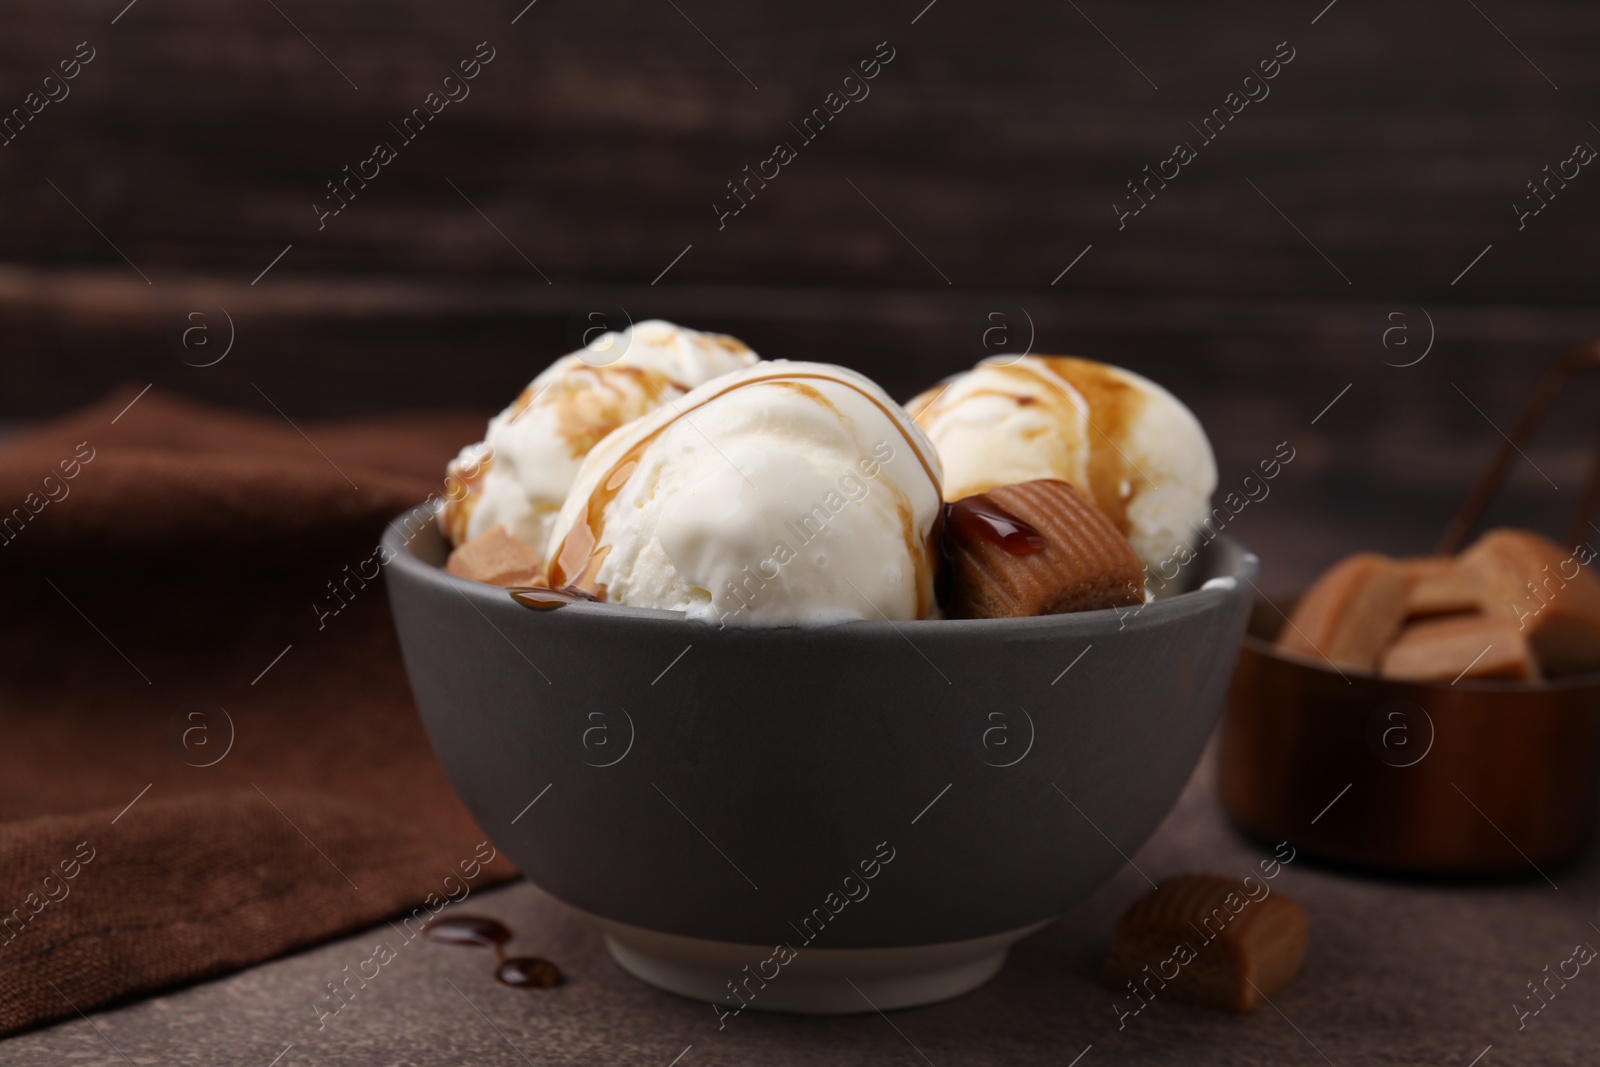 Photo of Scoops of ice cream with caramel sauce and candies on textured table, closeup